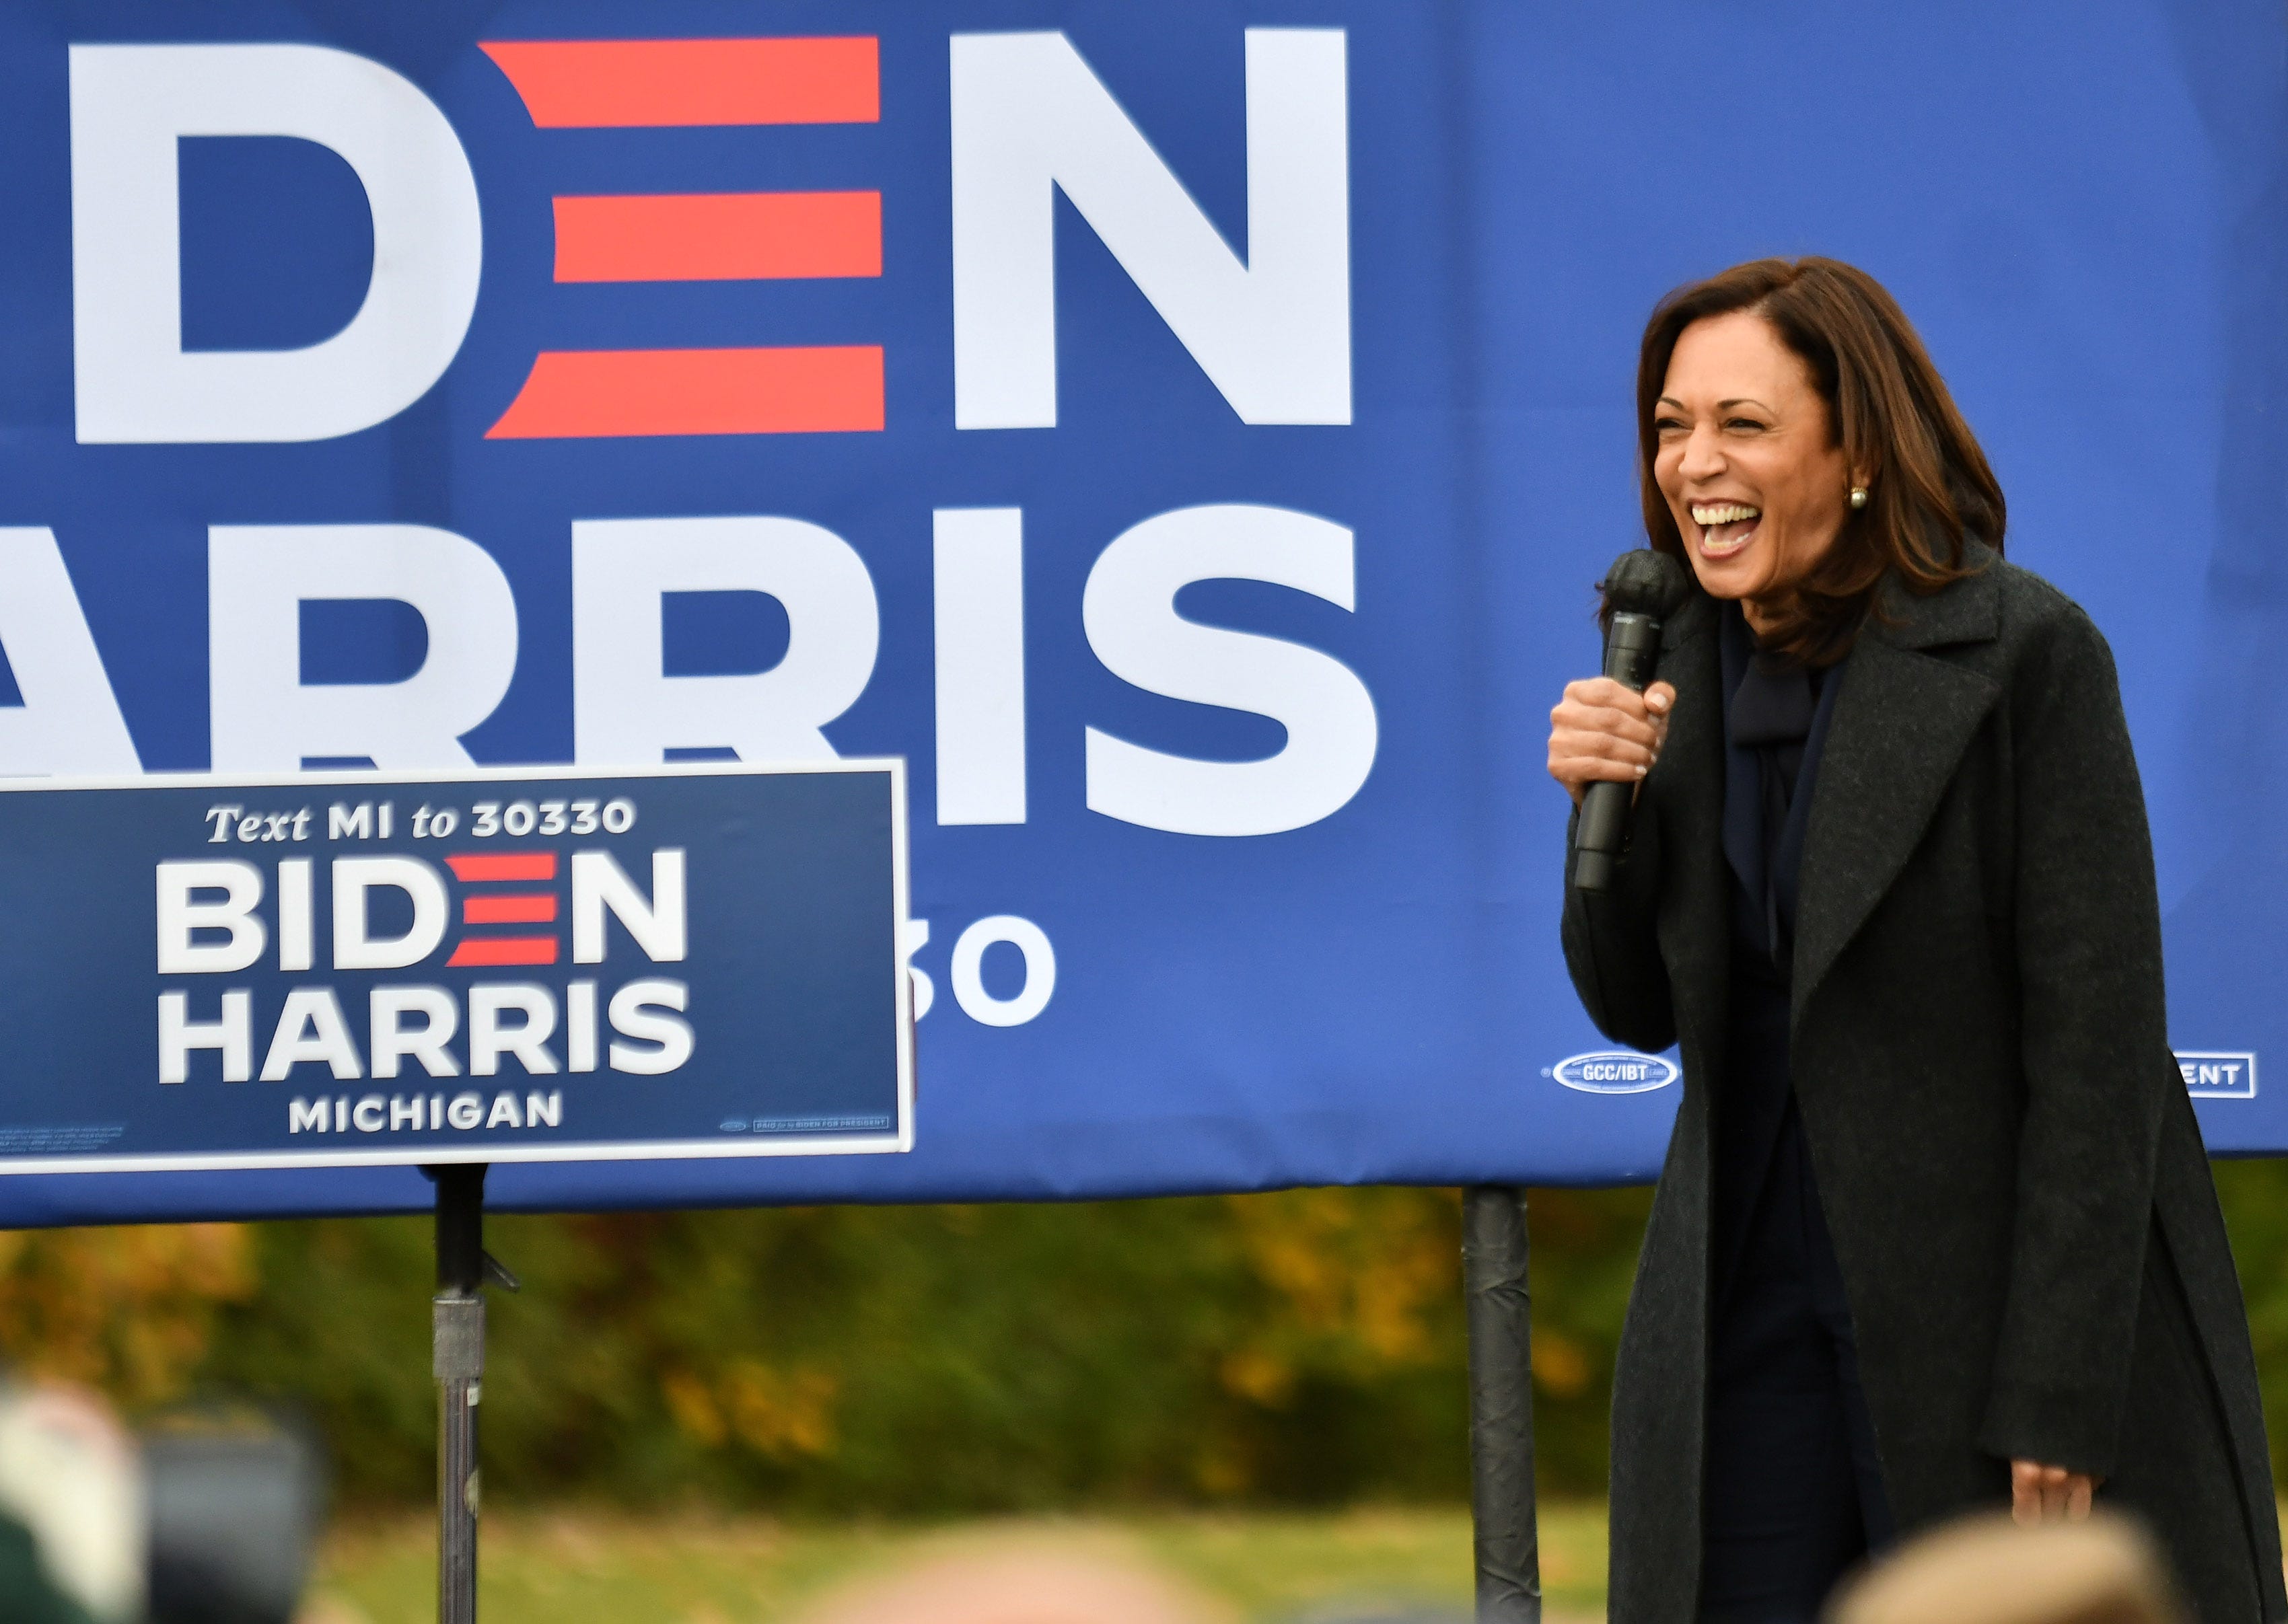 Democratic vice presidential candidate Sen. Kamala Harris greets the crowd at the Canvass Kickoff event at the Troy Community Center in Troy, Mich. in Detroit on Oct. 25, 2020.